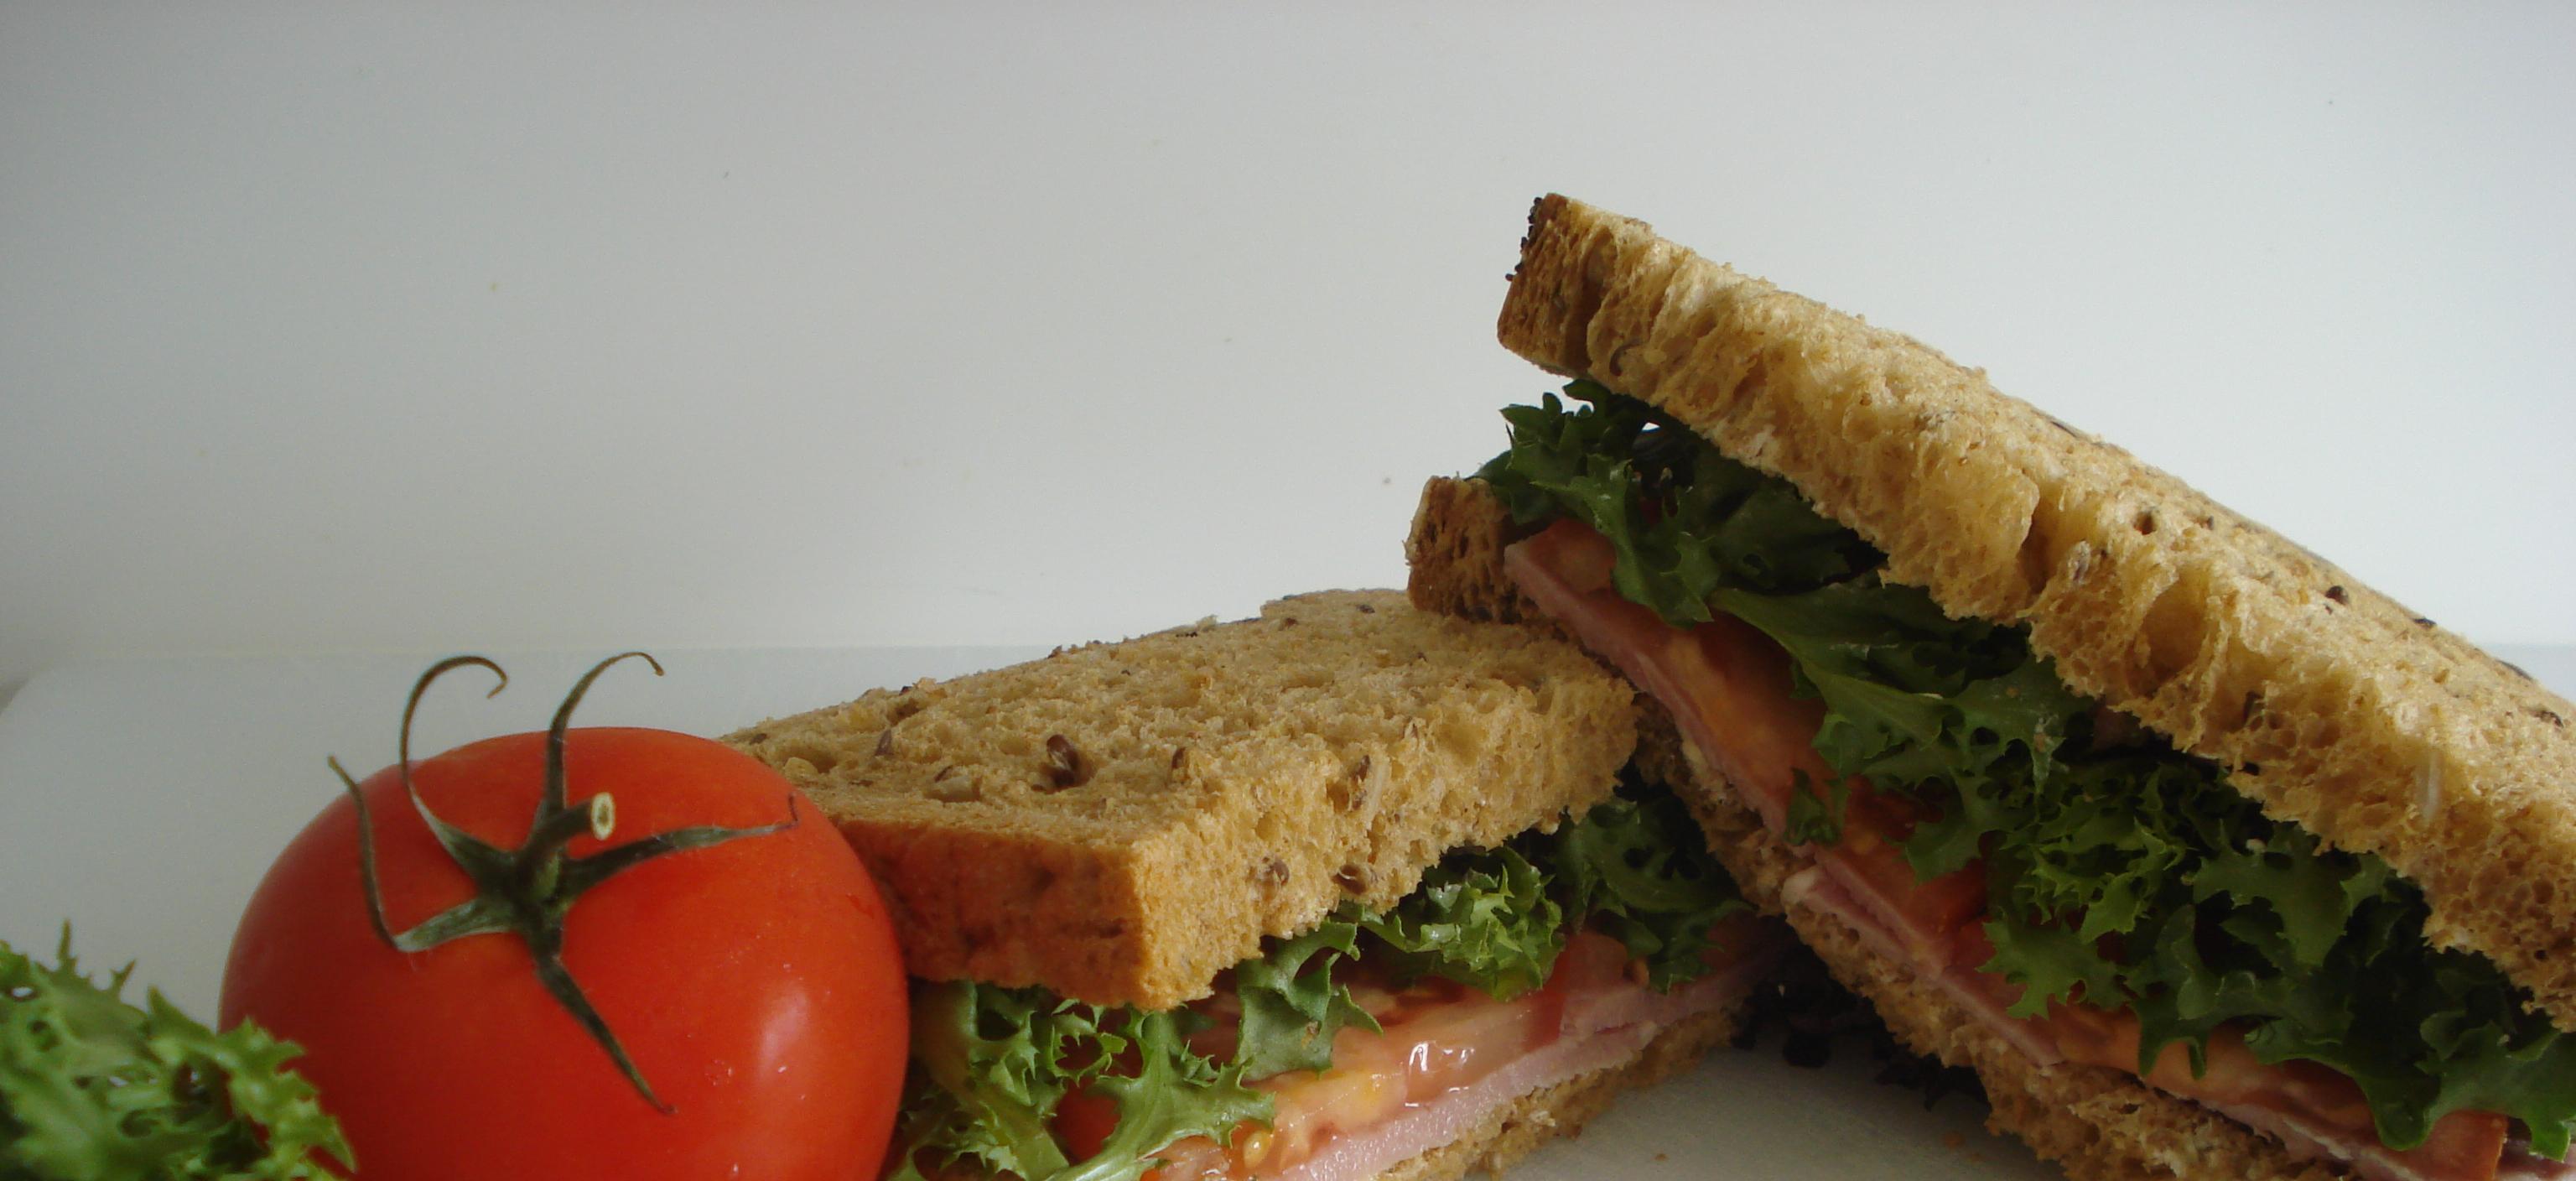 Picture of our sandwich of the week, bacon, lettuce and tomato in multigrain bread